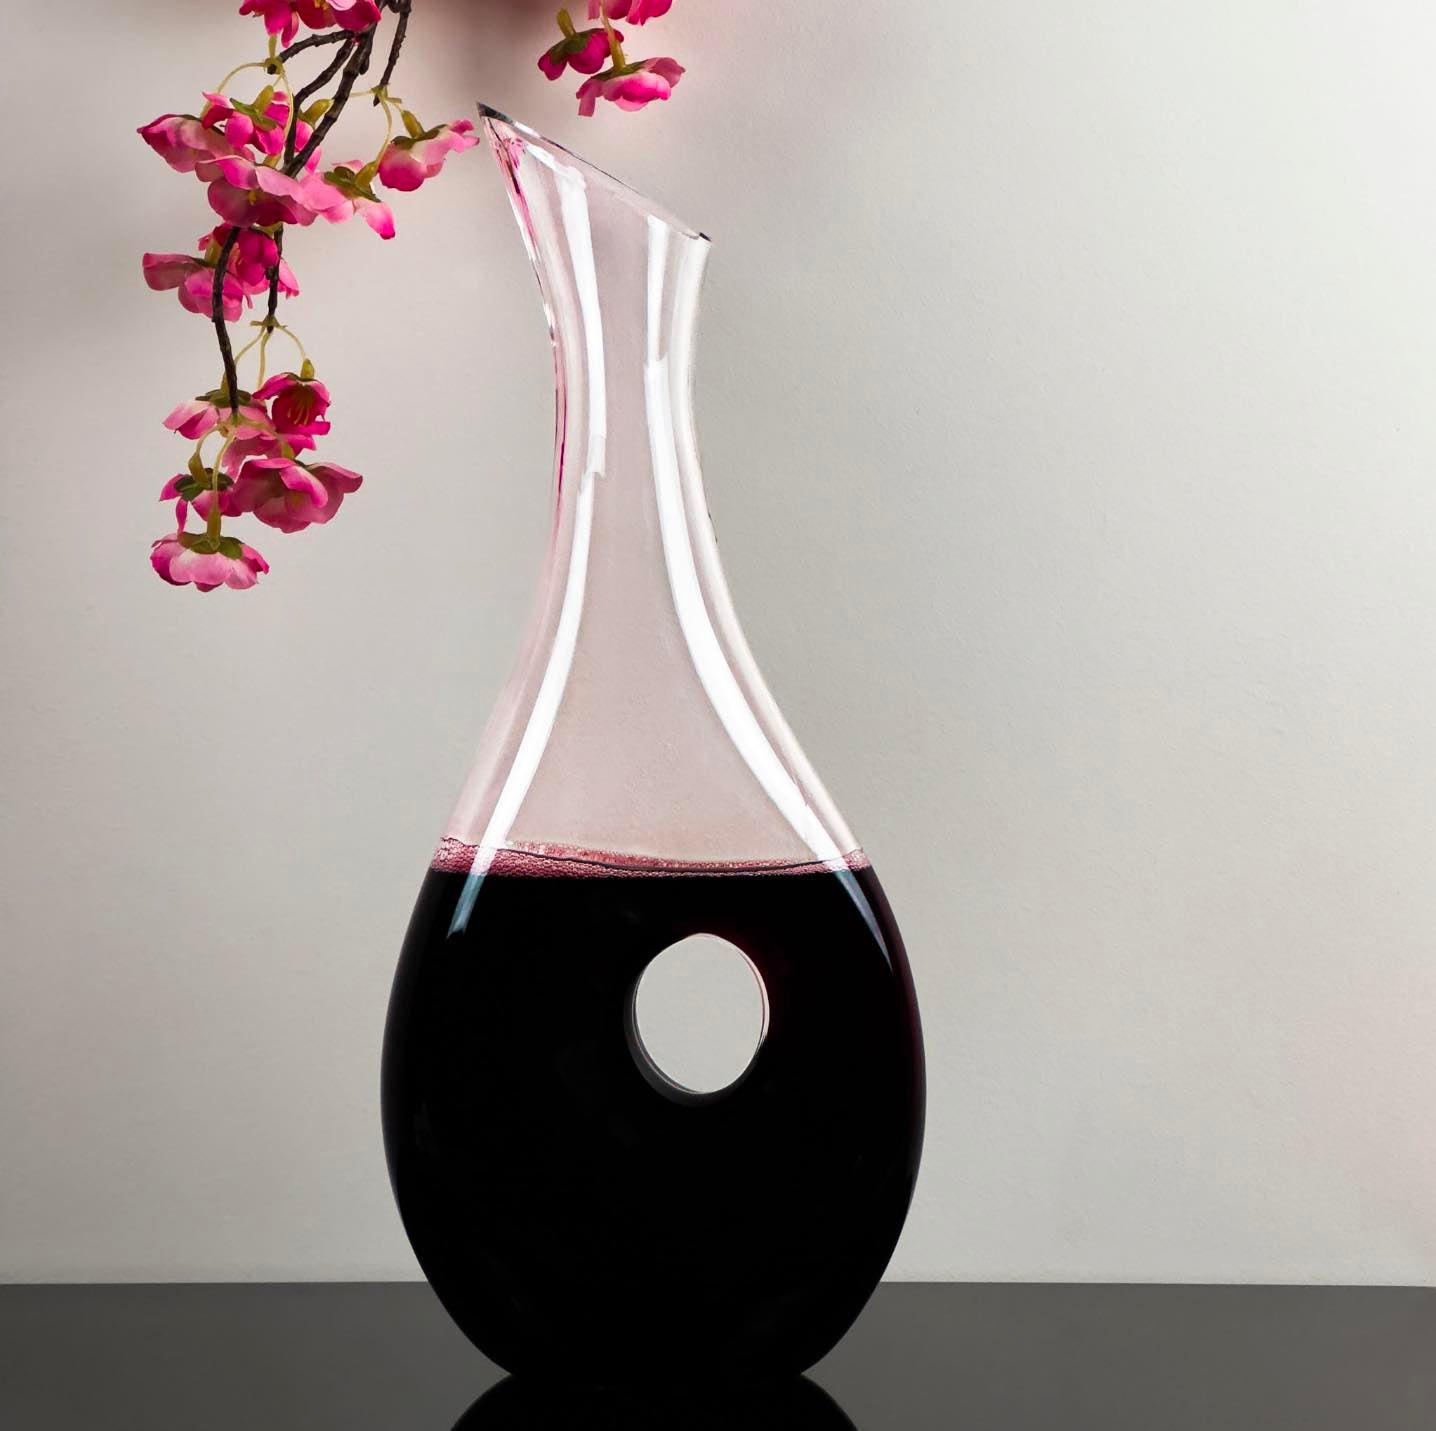 The Sophie Wine Decanter Hand Blown Glass 